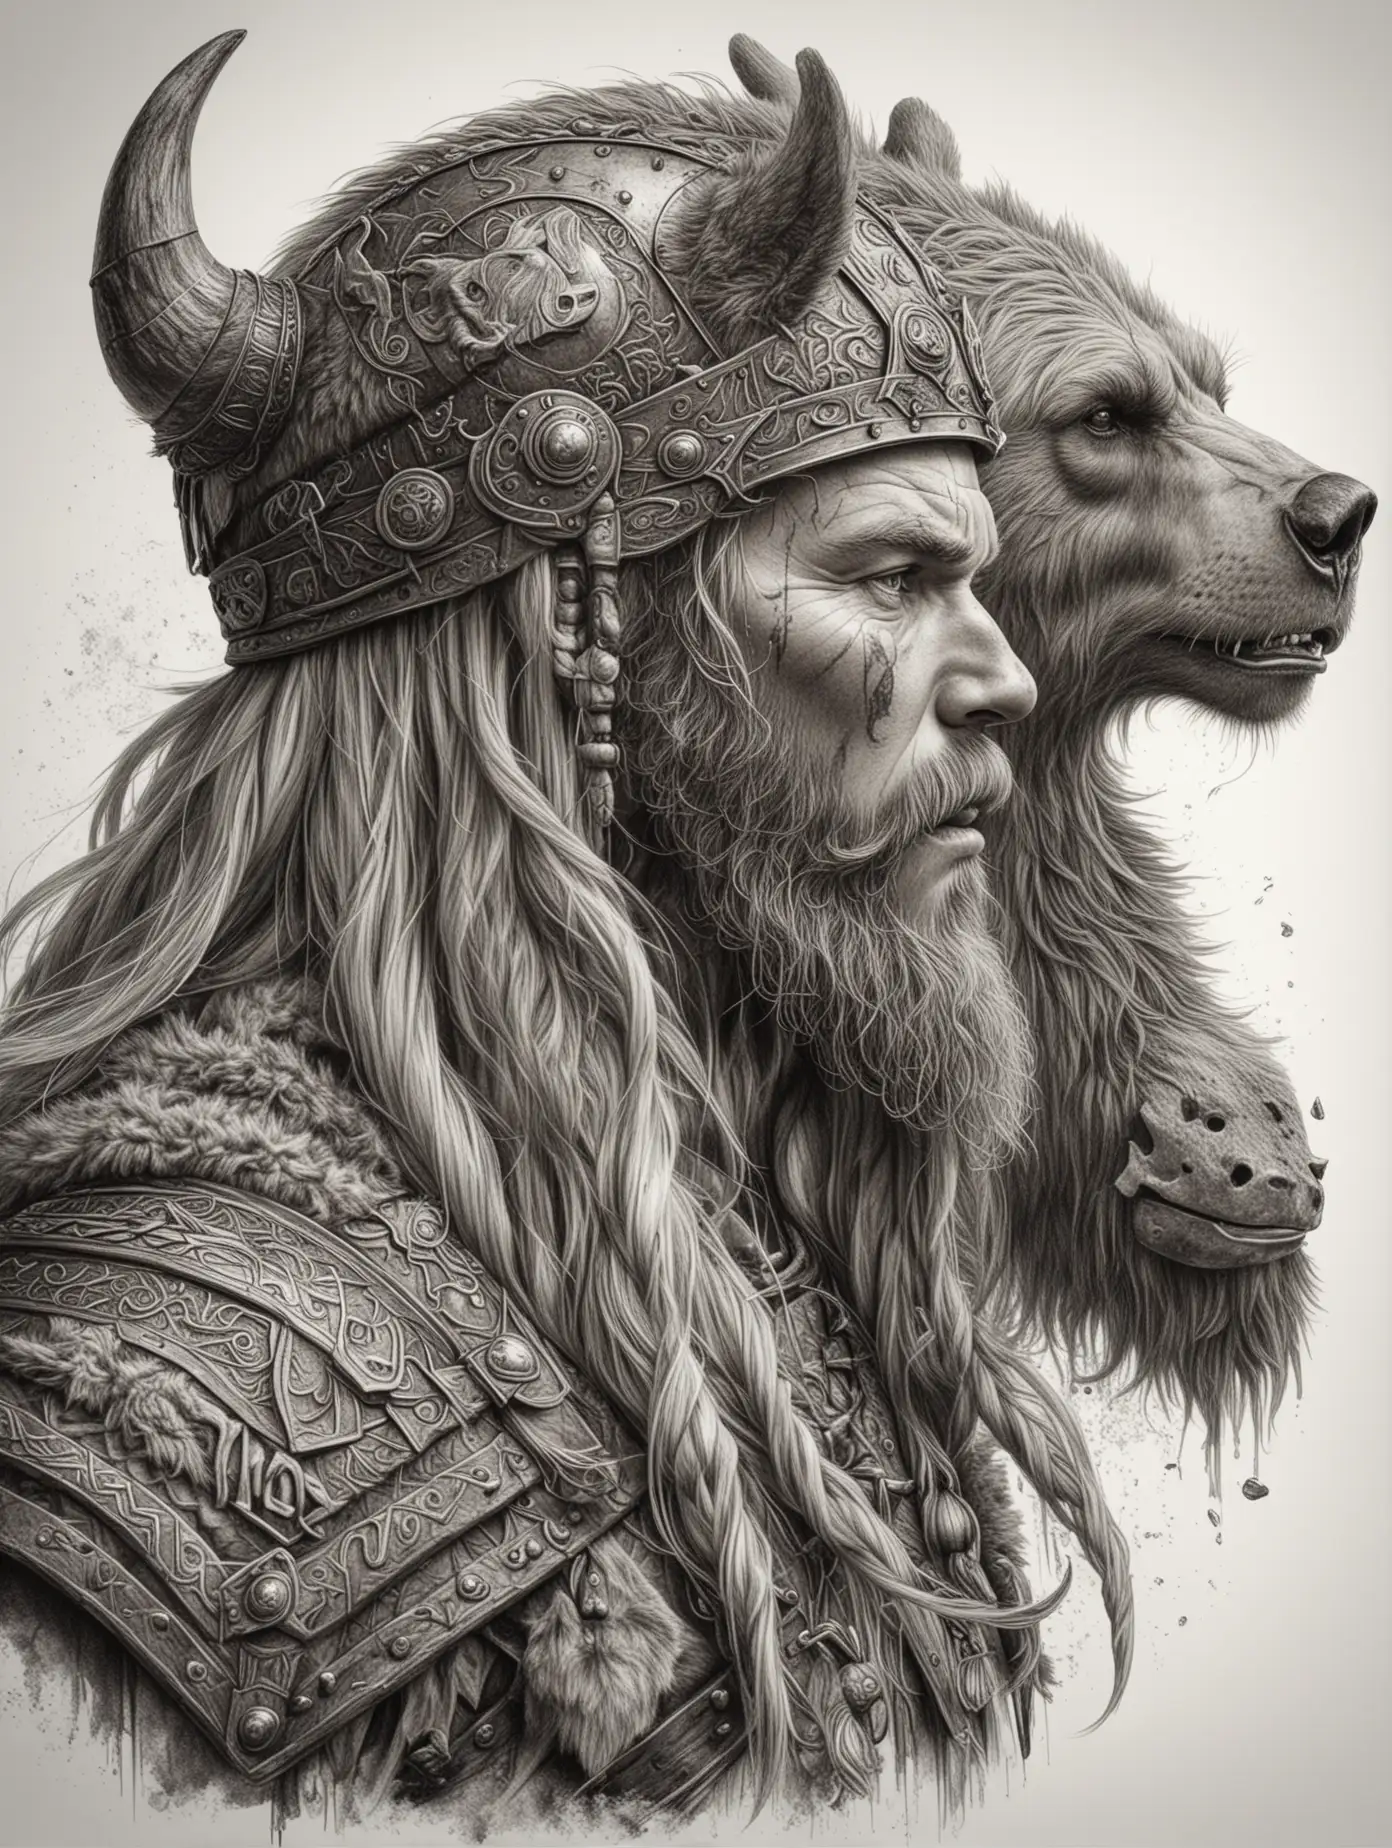 Realistic-Viking-Warrior-with-Bear-in-Pencil-Sketch